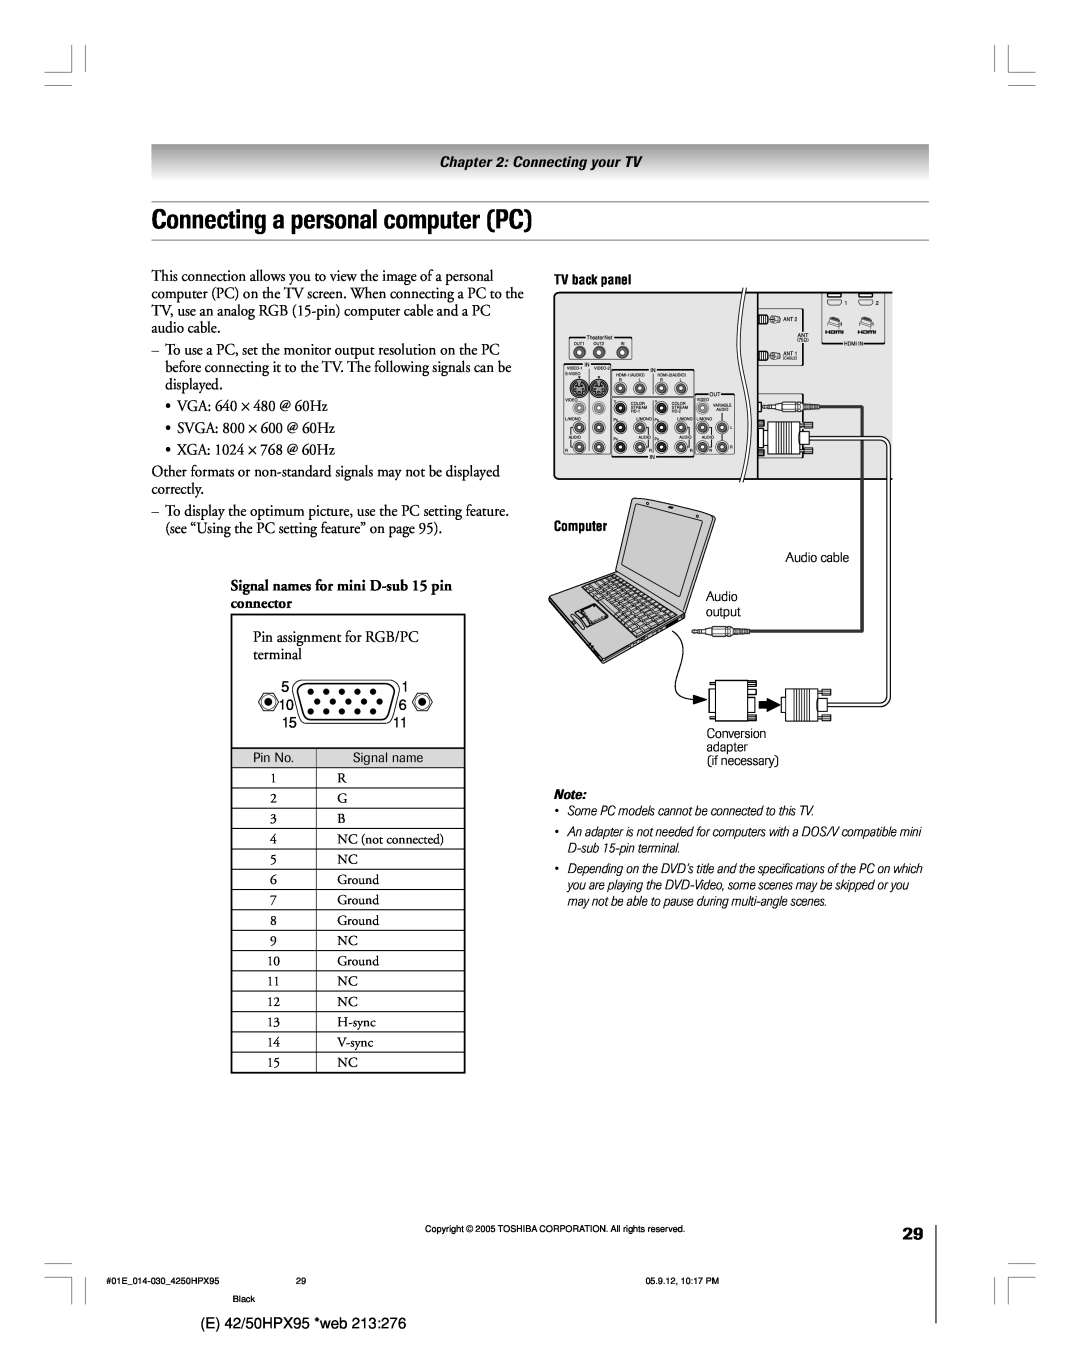 Toshiba 42HPX95 owner manual Connecting a personal computer PC, Signal names for mini D-sub 15 pin connector 